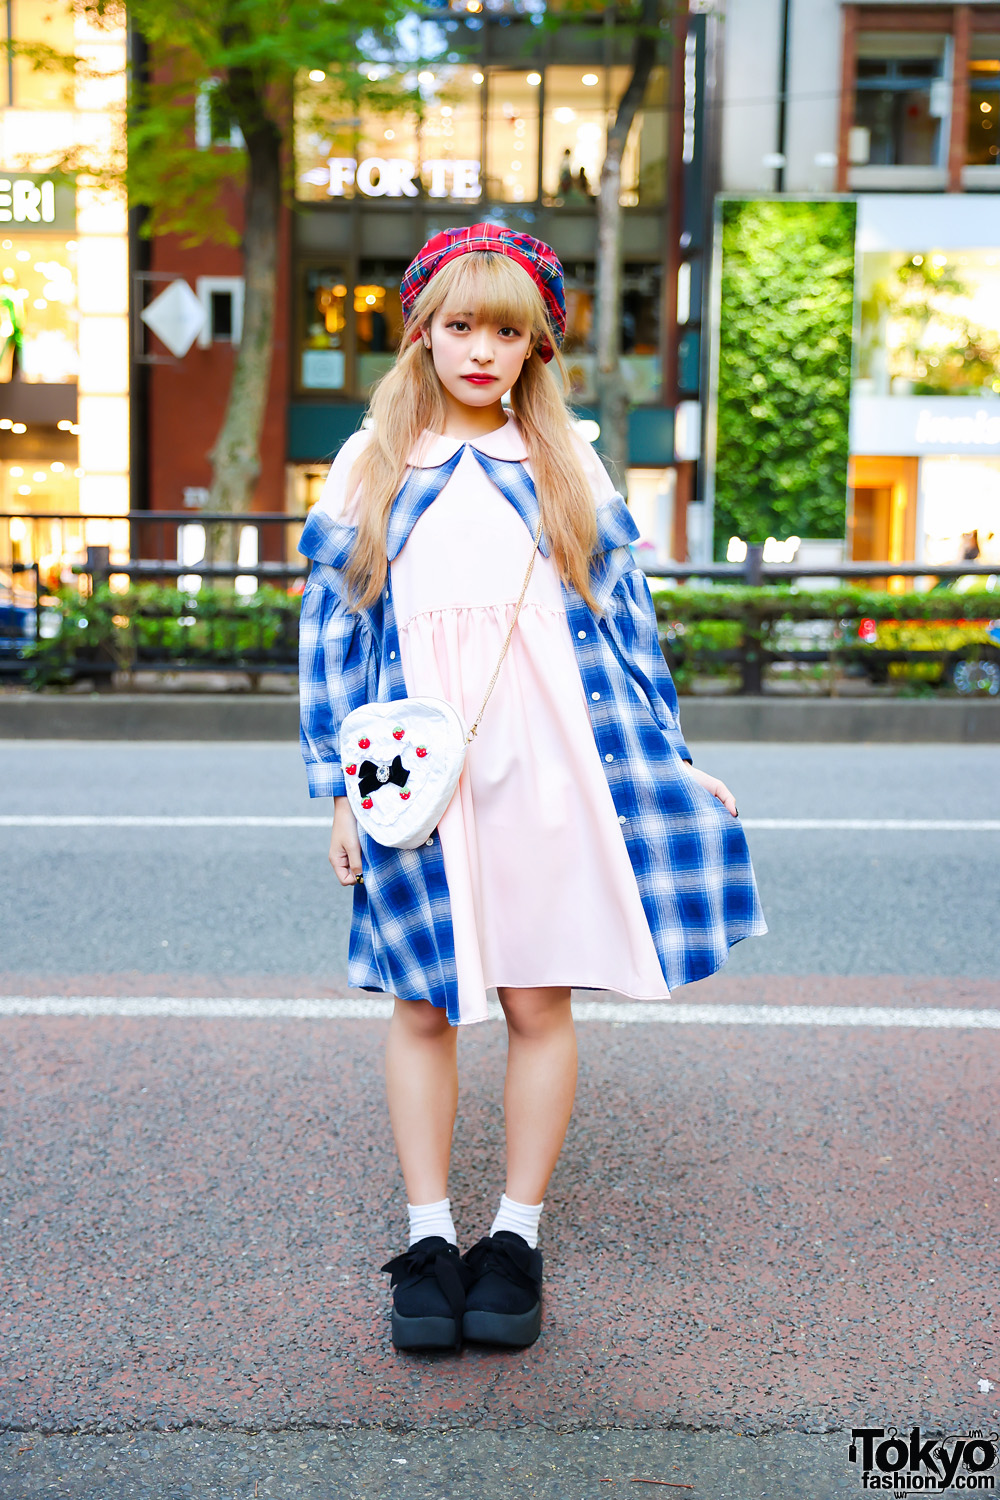 HEIHEI Tokyo Streetwear Style w/ Twin Blonde Tails, Plaid Beret, HEIHEI Babydoll Dress, Quilted Heart Bag & Tokyo Bopper Bow Shoes